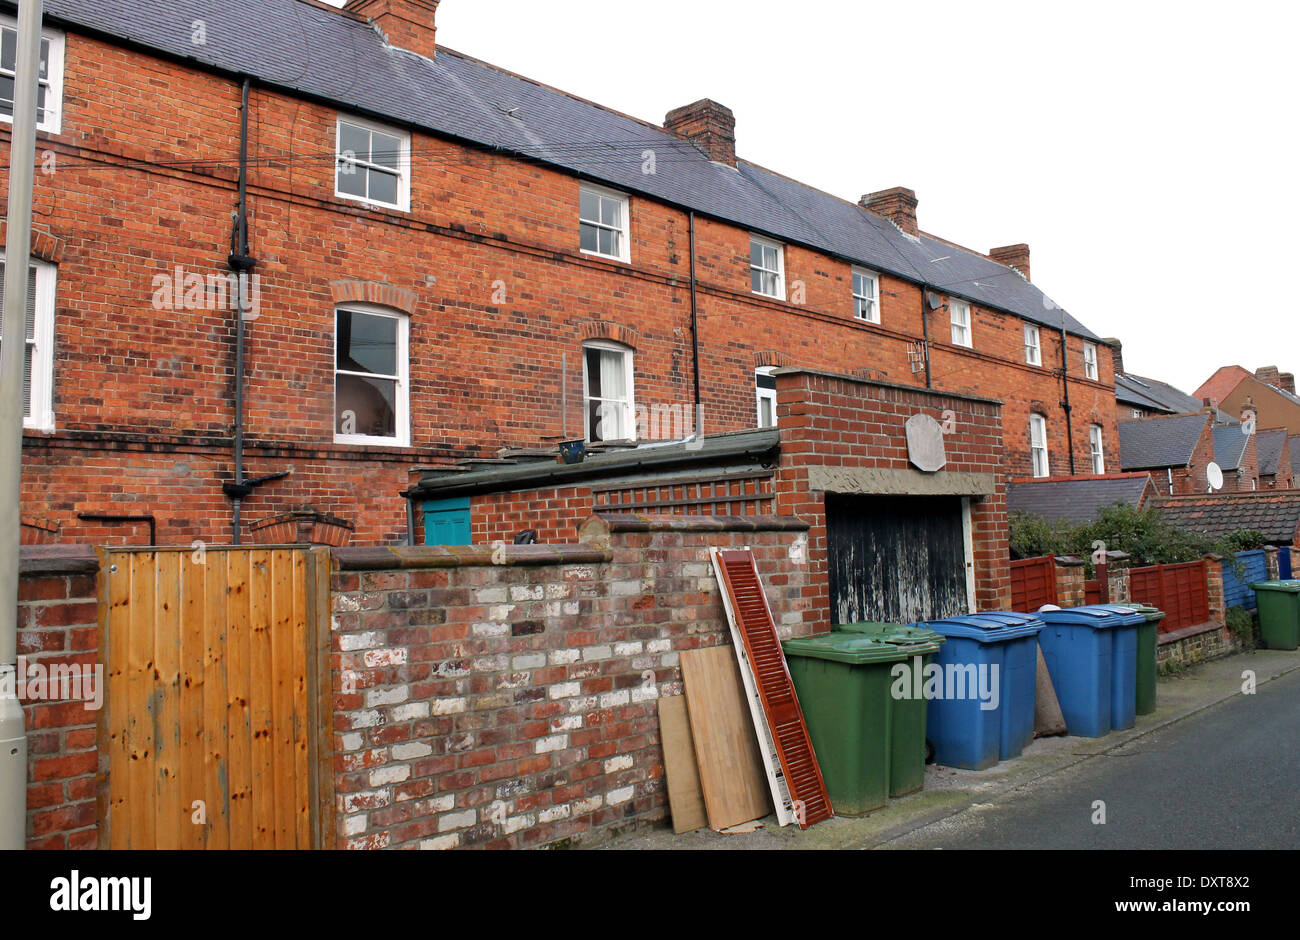 Rear view of terraced house in town with recycling bins. Stock Photo